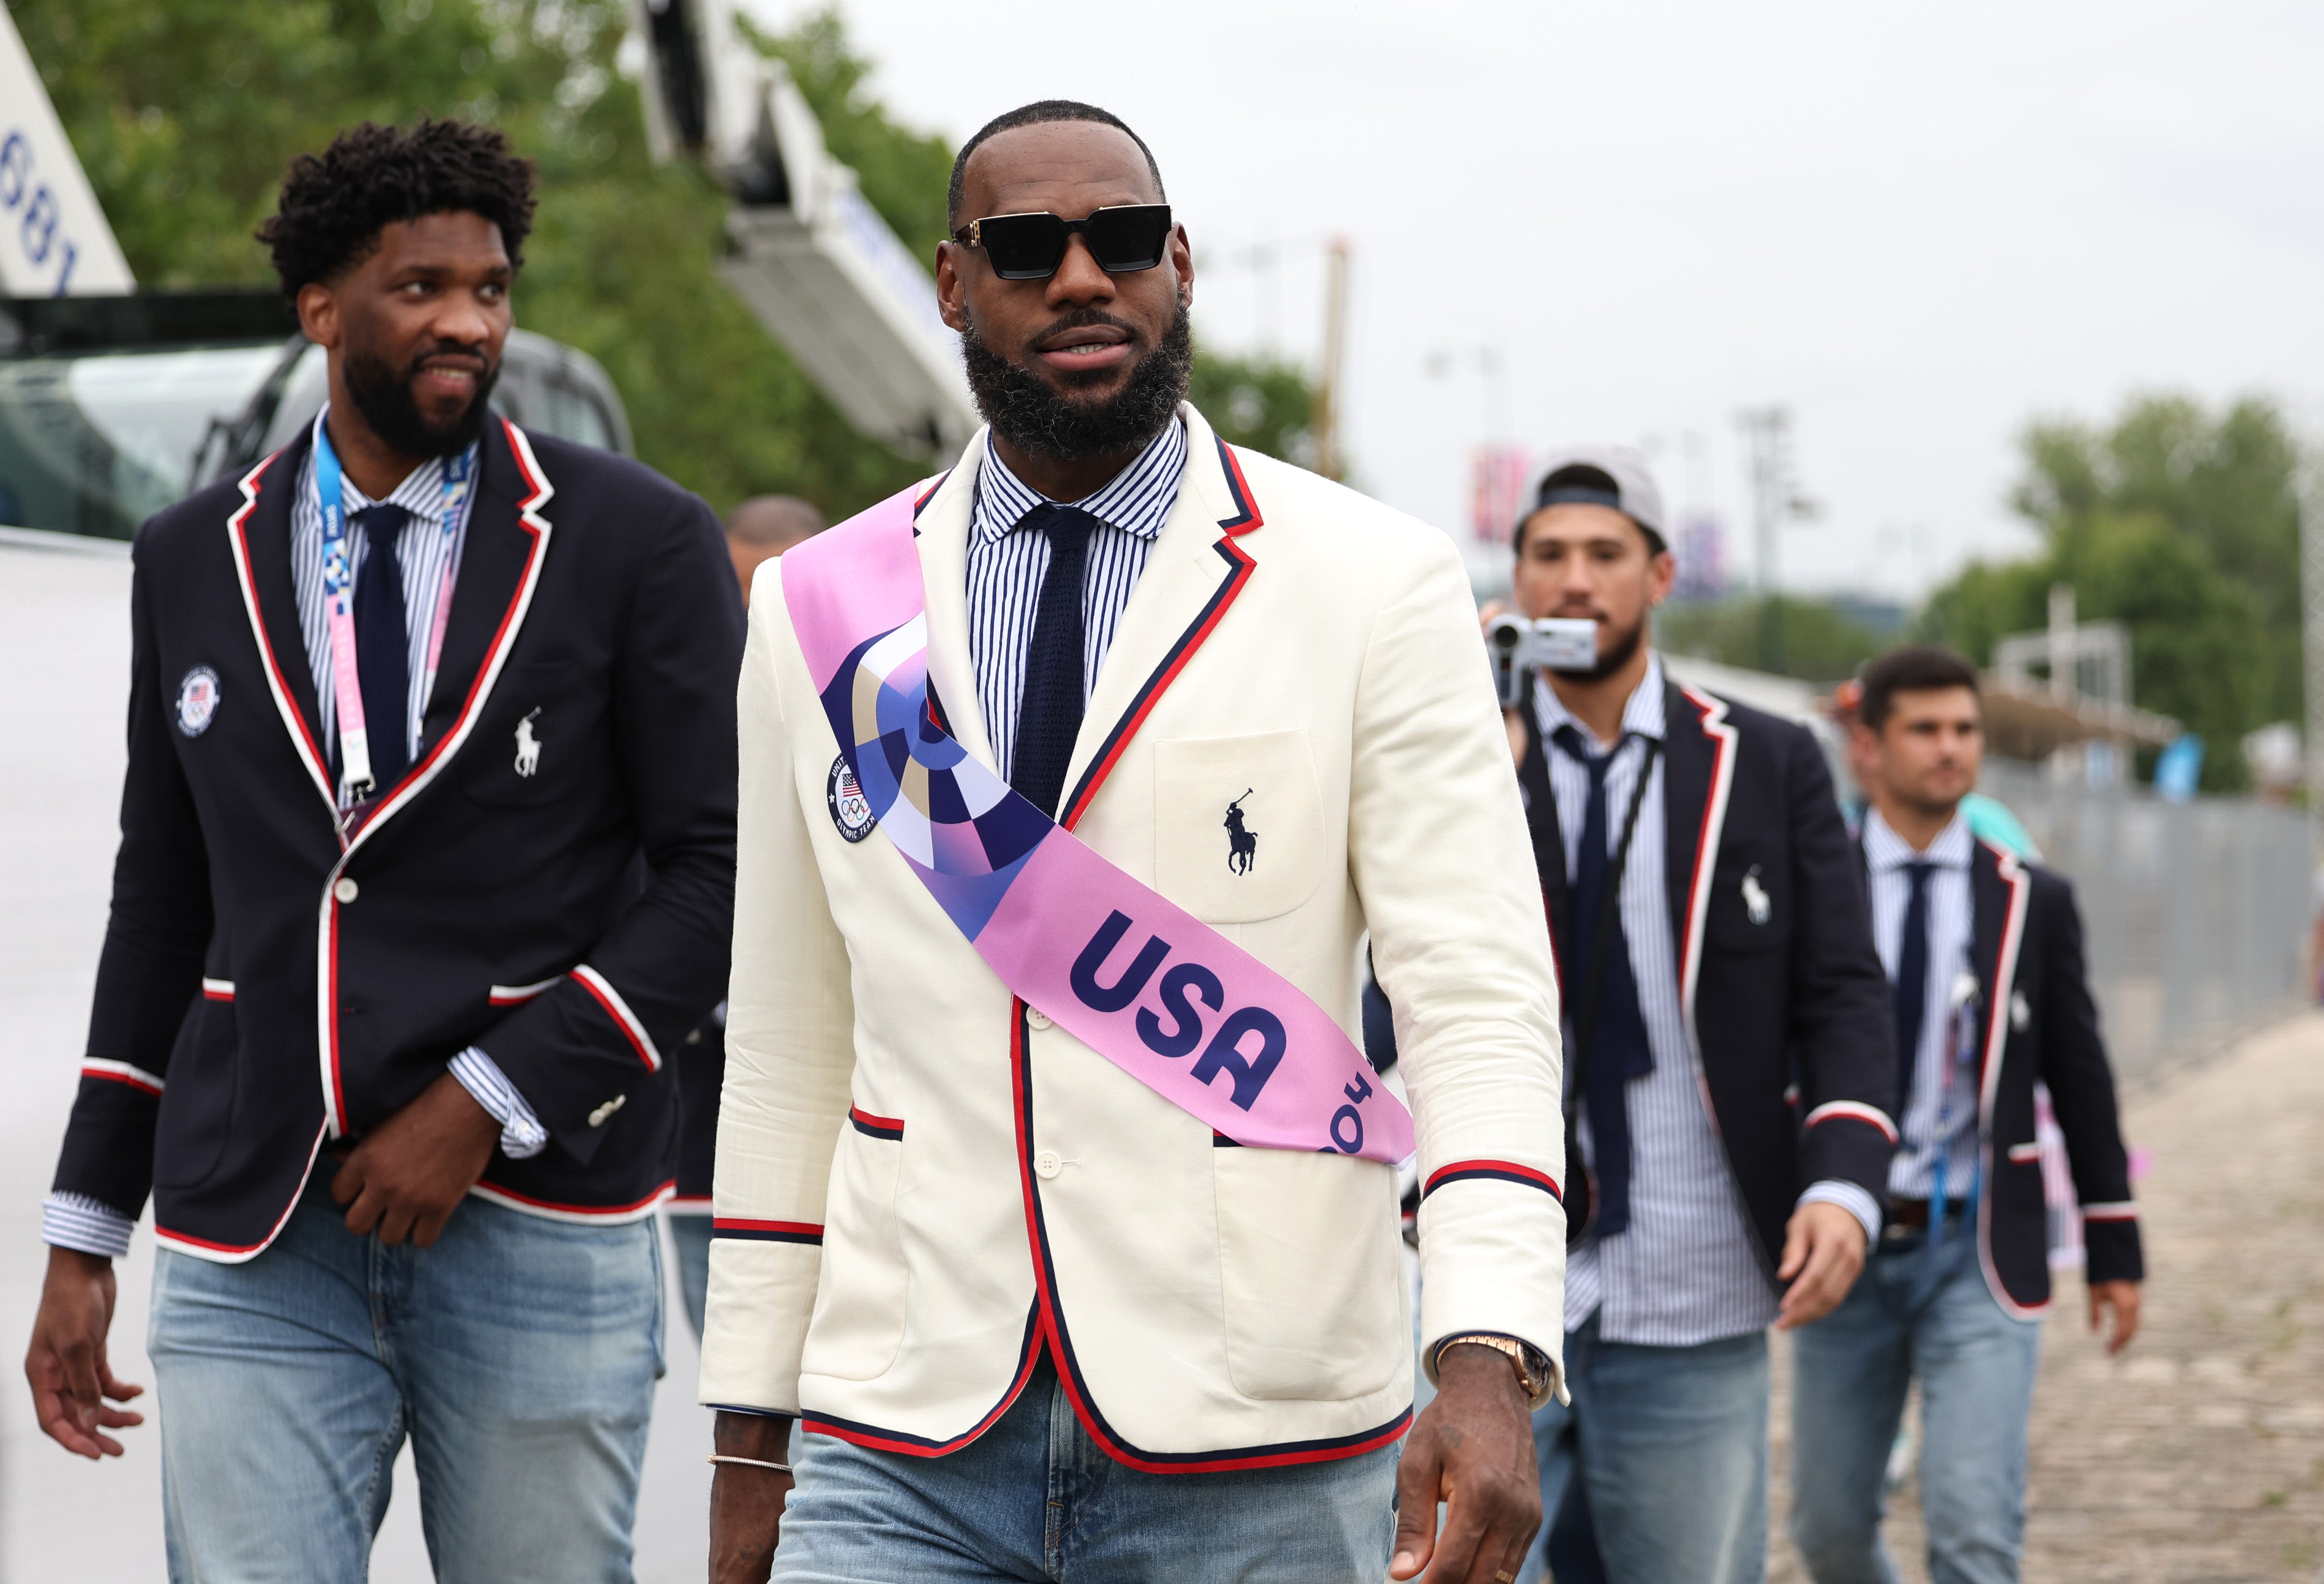 Fans roasted Team USA's Ralph Lauren outfits during the 2024 Paris Olympics opening ceremony